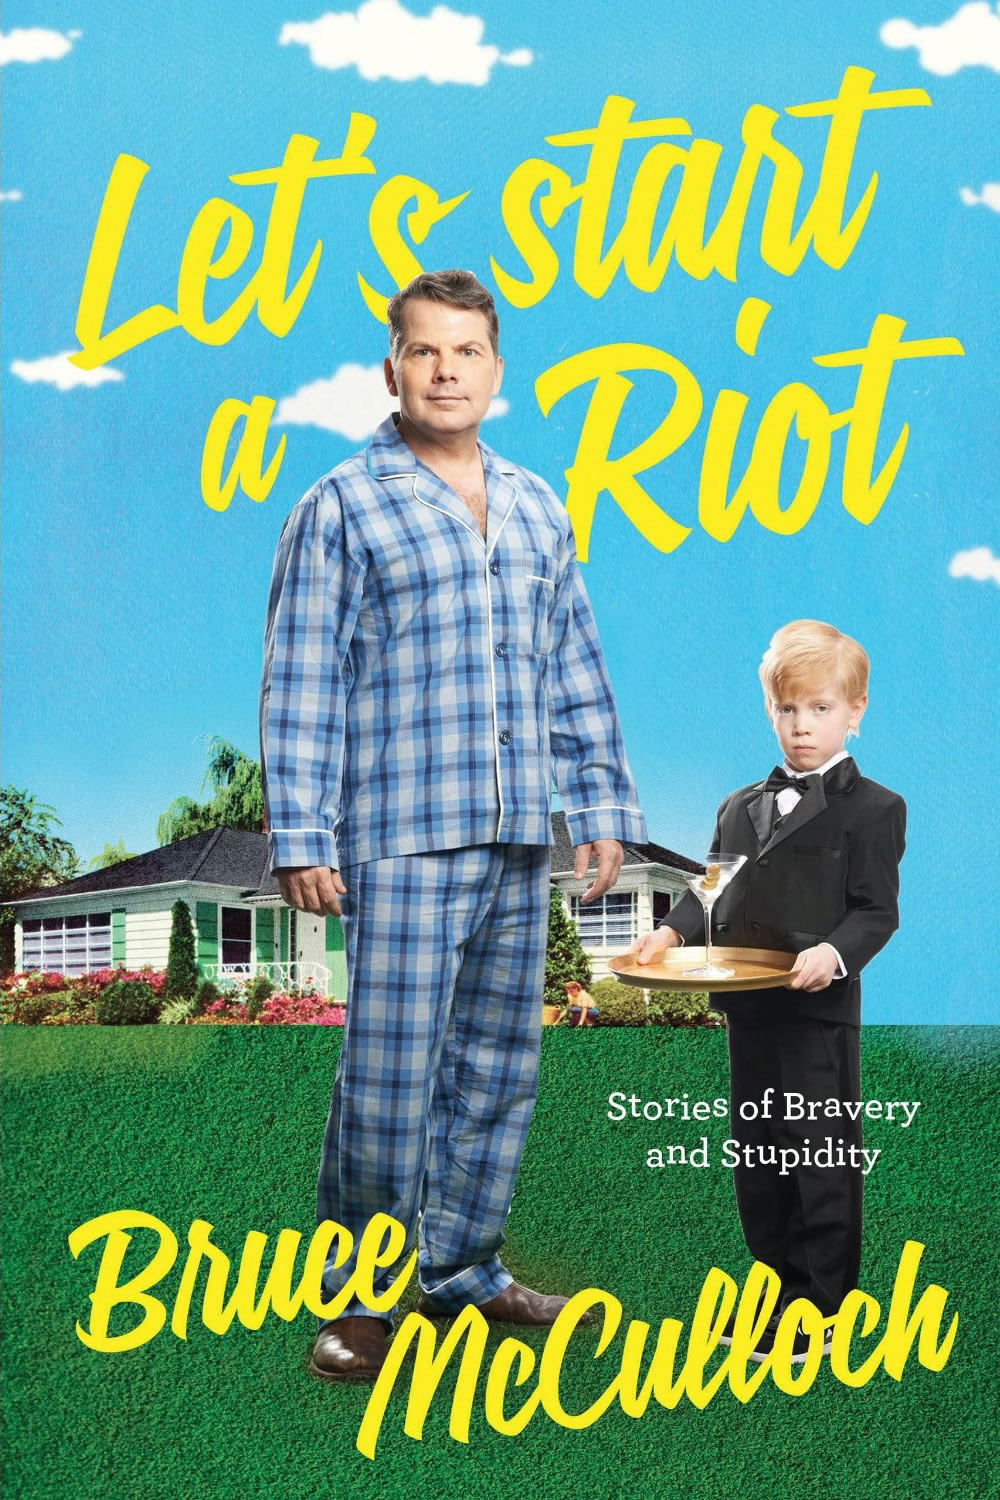 Bruce McCulloch's Let's Start a Riot